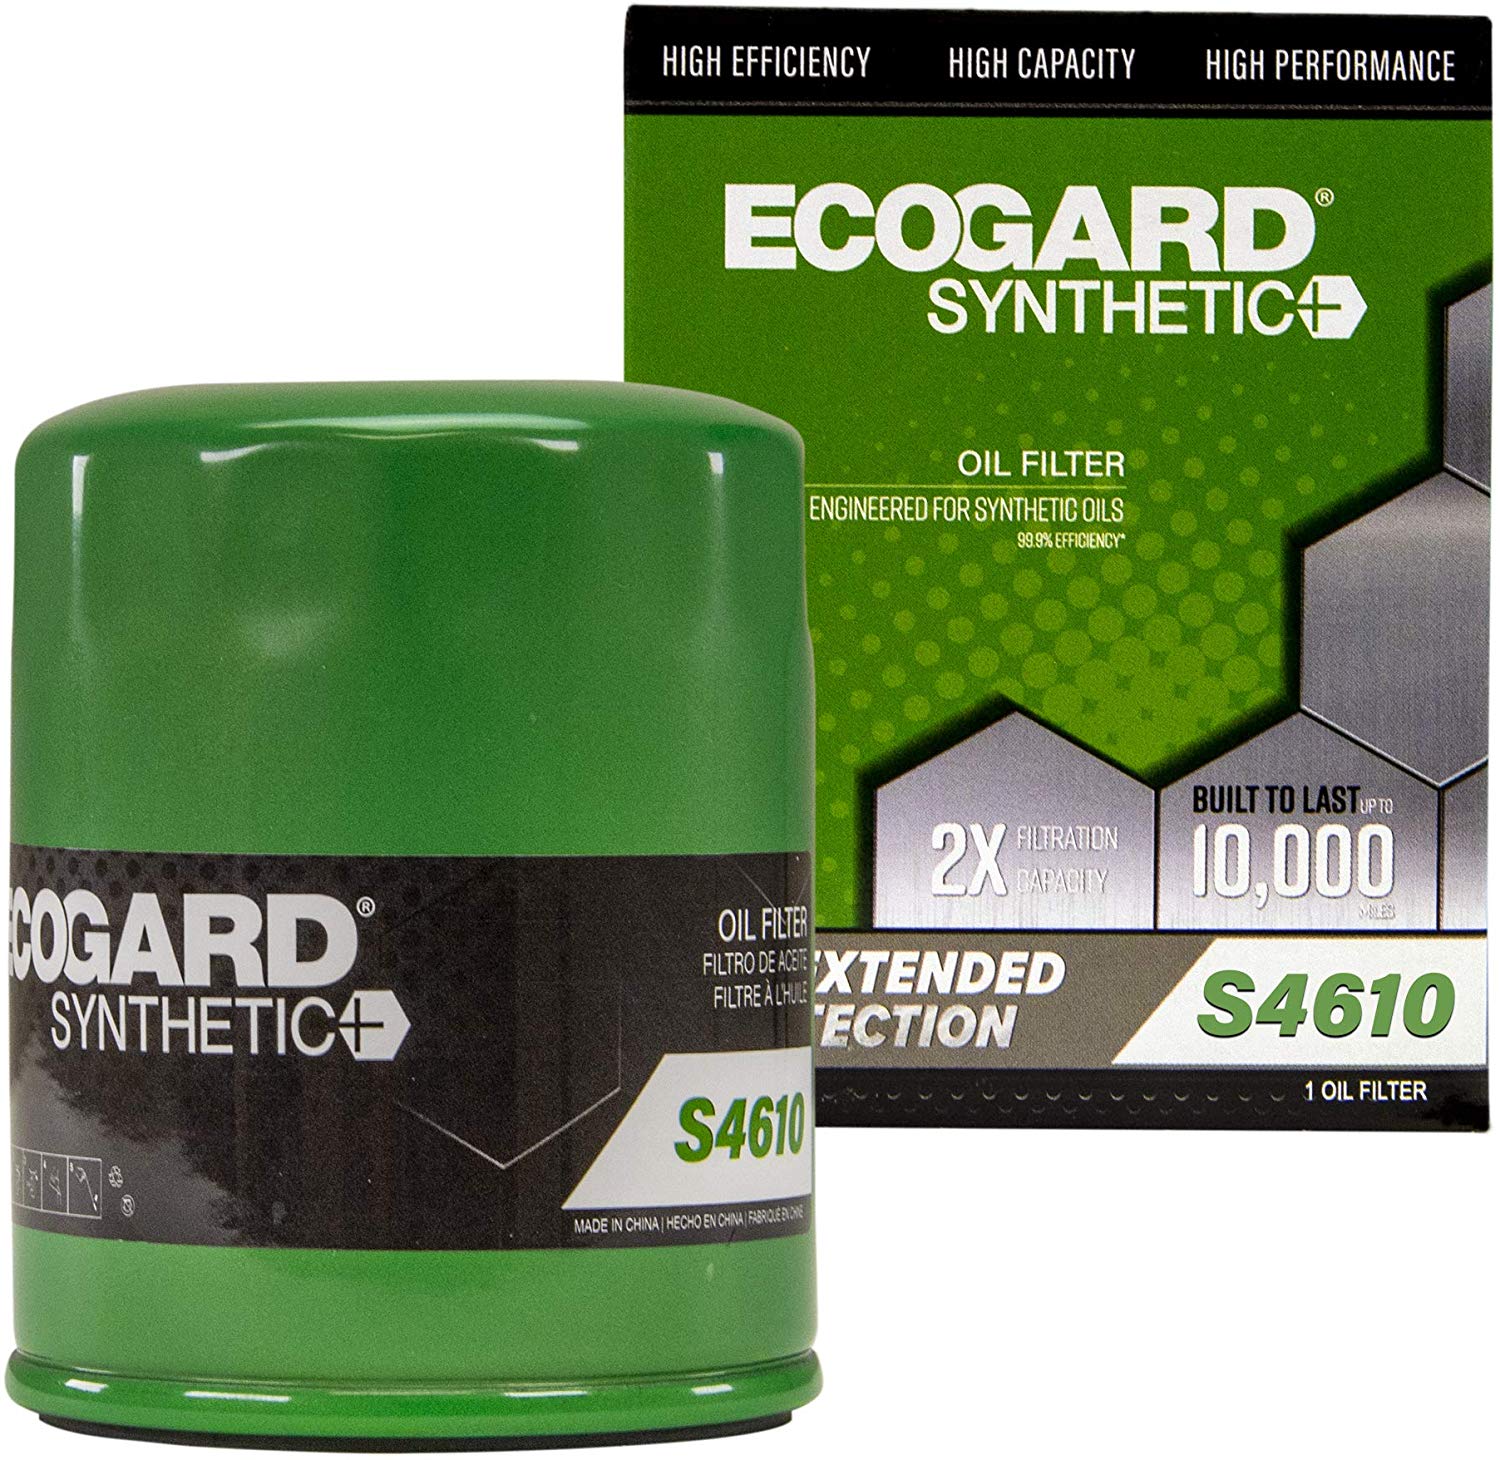 ECOGARD S4610 Synthetic+ Oil Filter